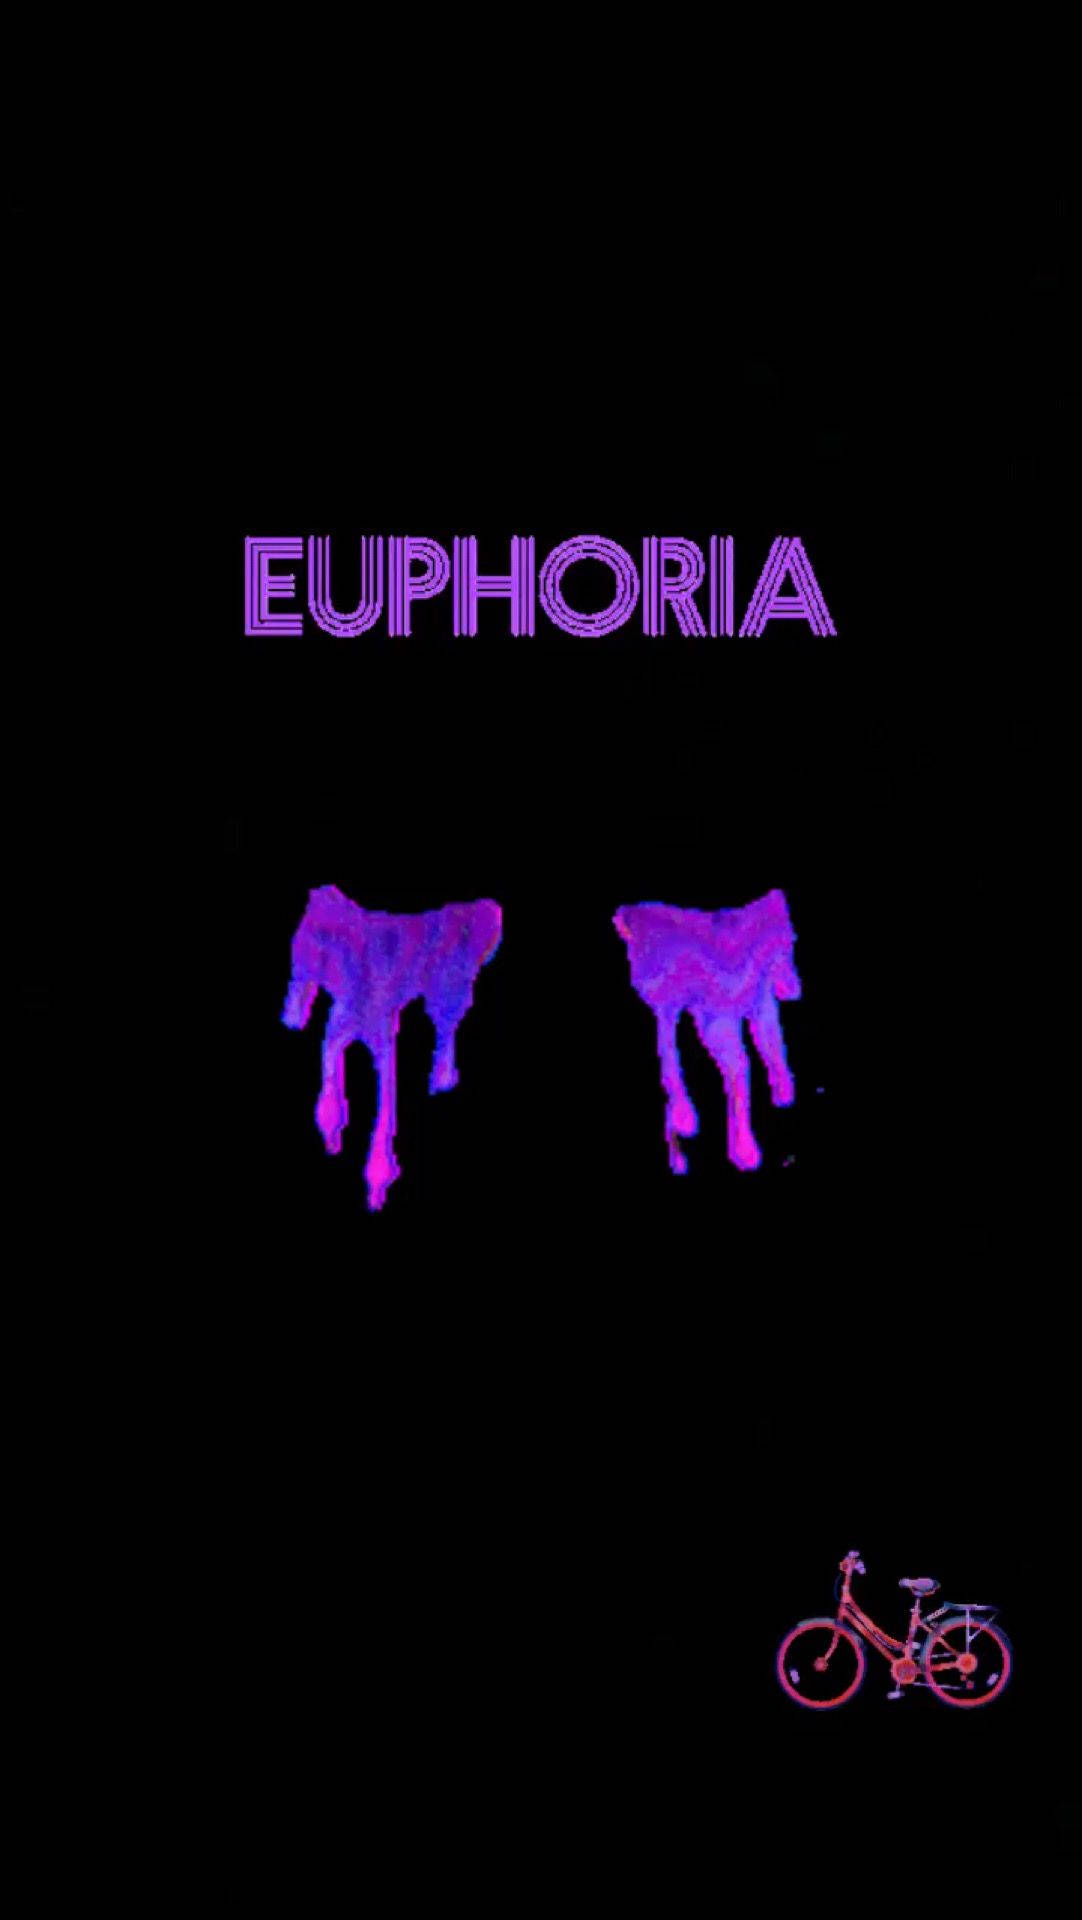 Euphoria phone background with purple text and a bicycle - Euphoria